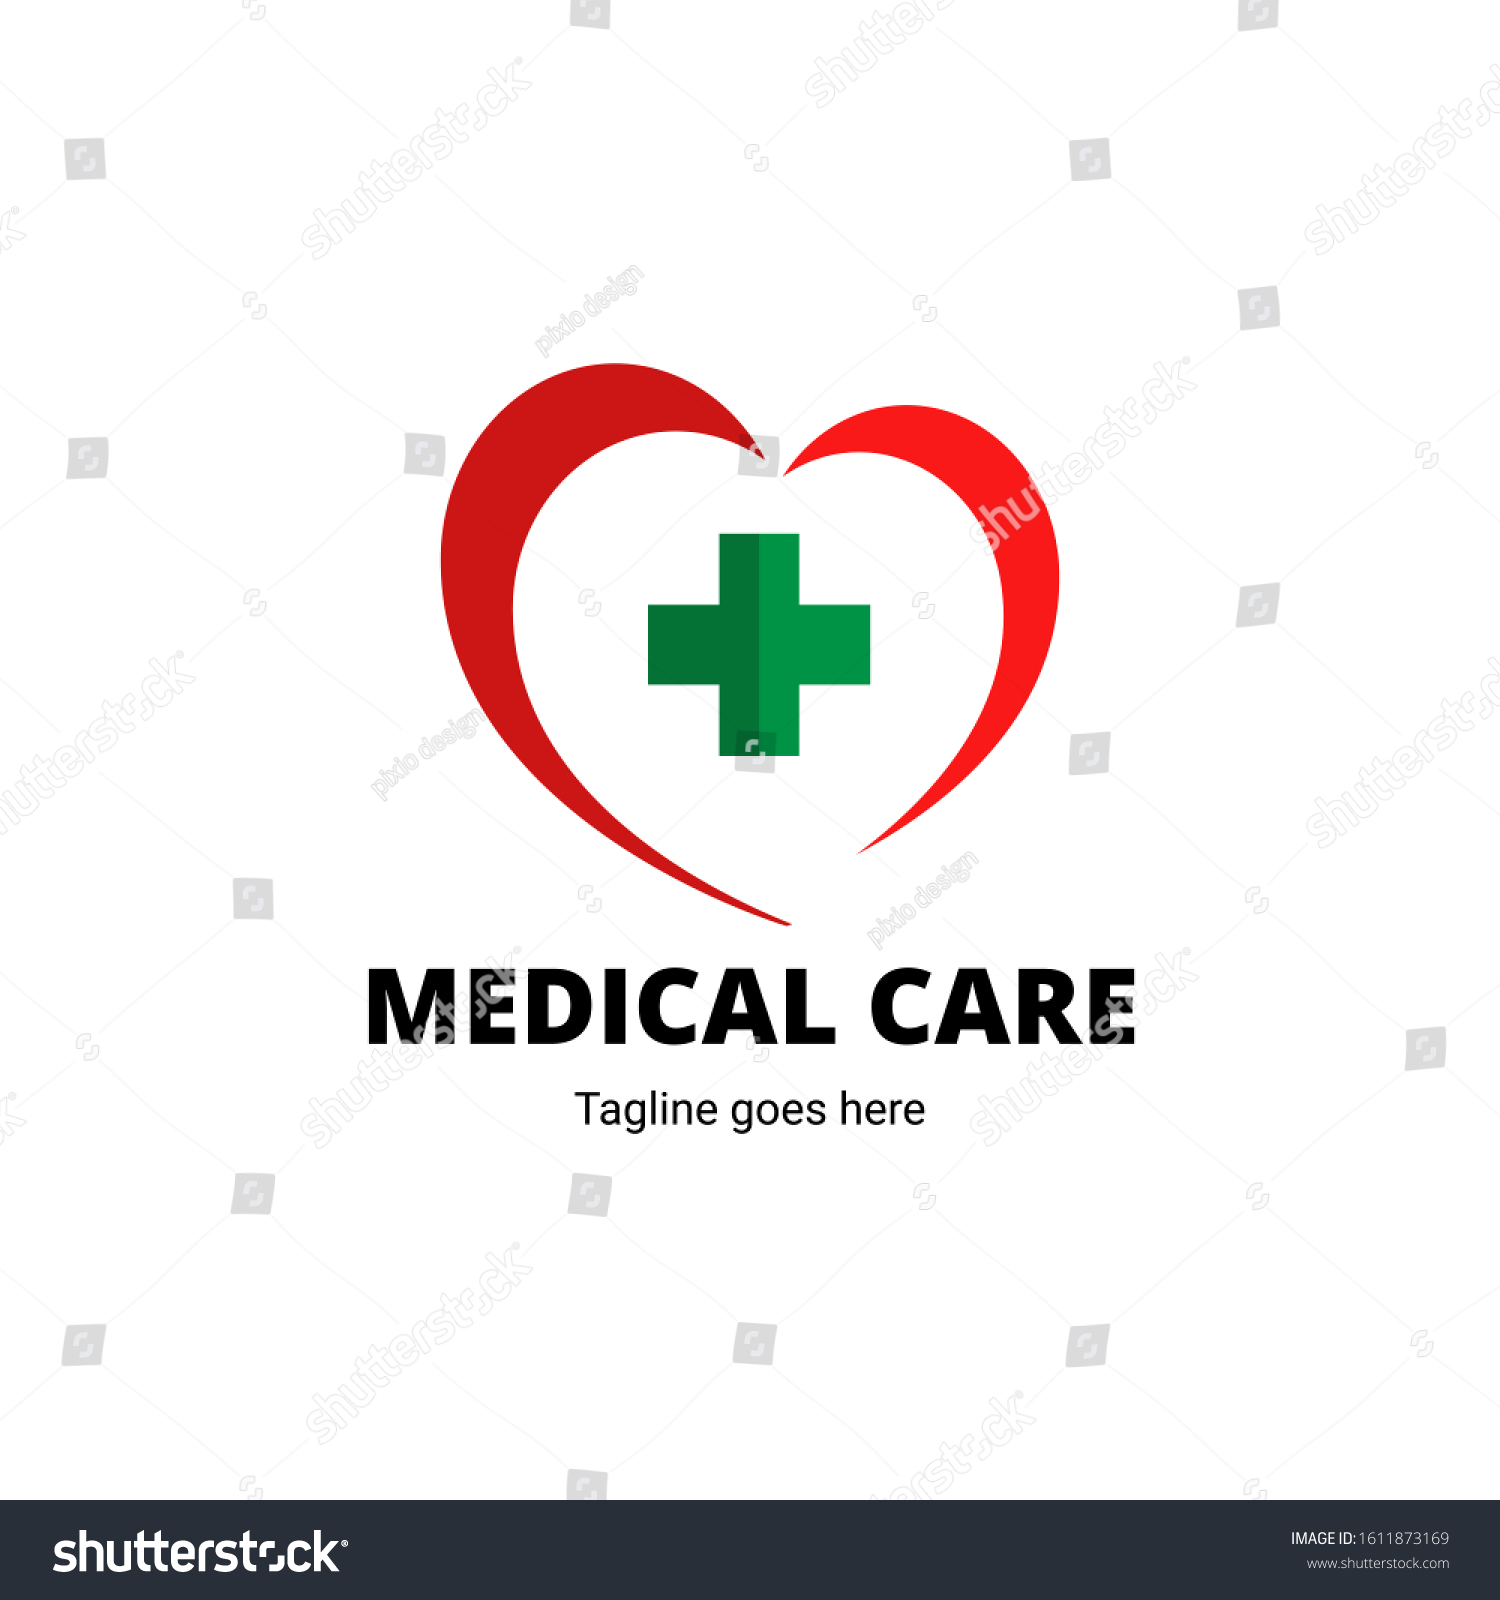 Medical Pharmacy Health Care Clinic Design Stock Vector (Royalty Free ...